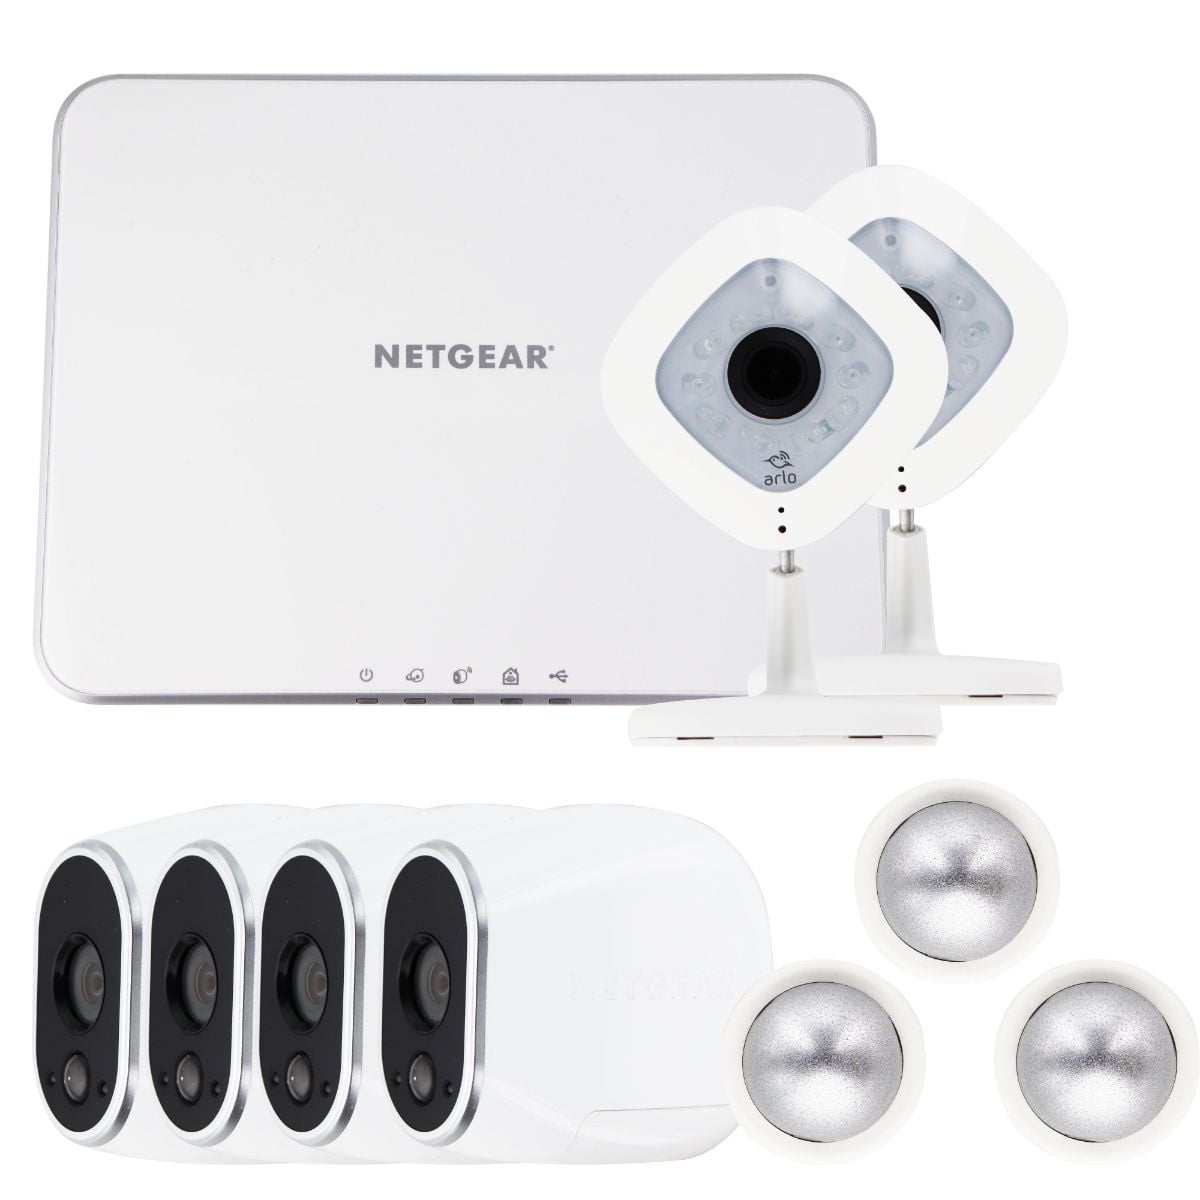 NetGear Arlo Wireless Security System with 4 Cameras and 2 Arlo Q (VMK3500) (Refurbished